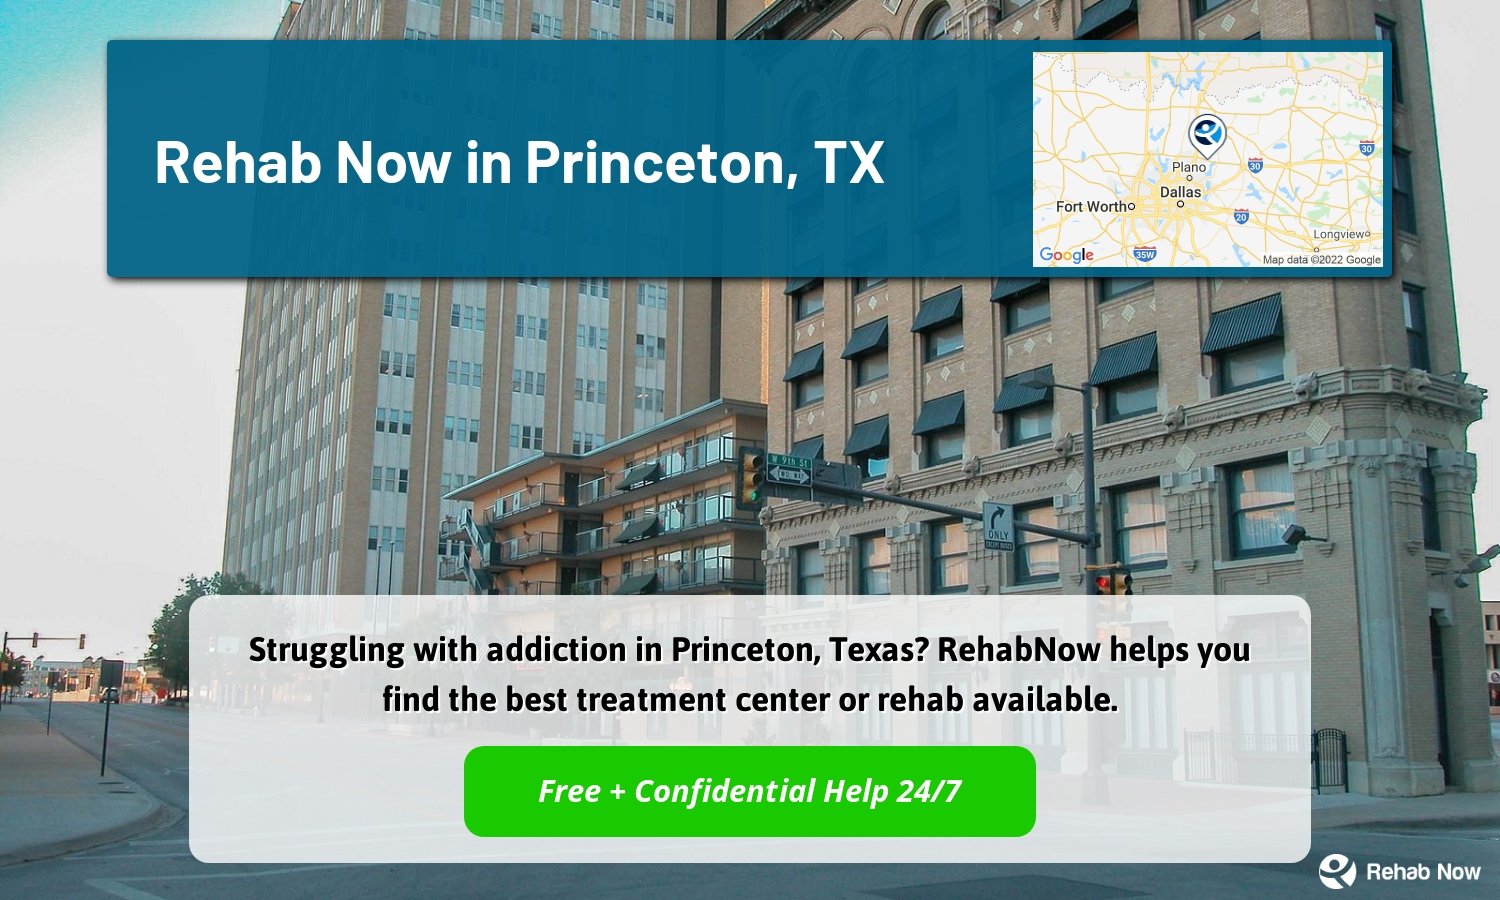 Struggling with addiction in Princeton, Texas? RehabNow helps you find the best treatment center or rehab available.